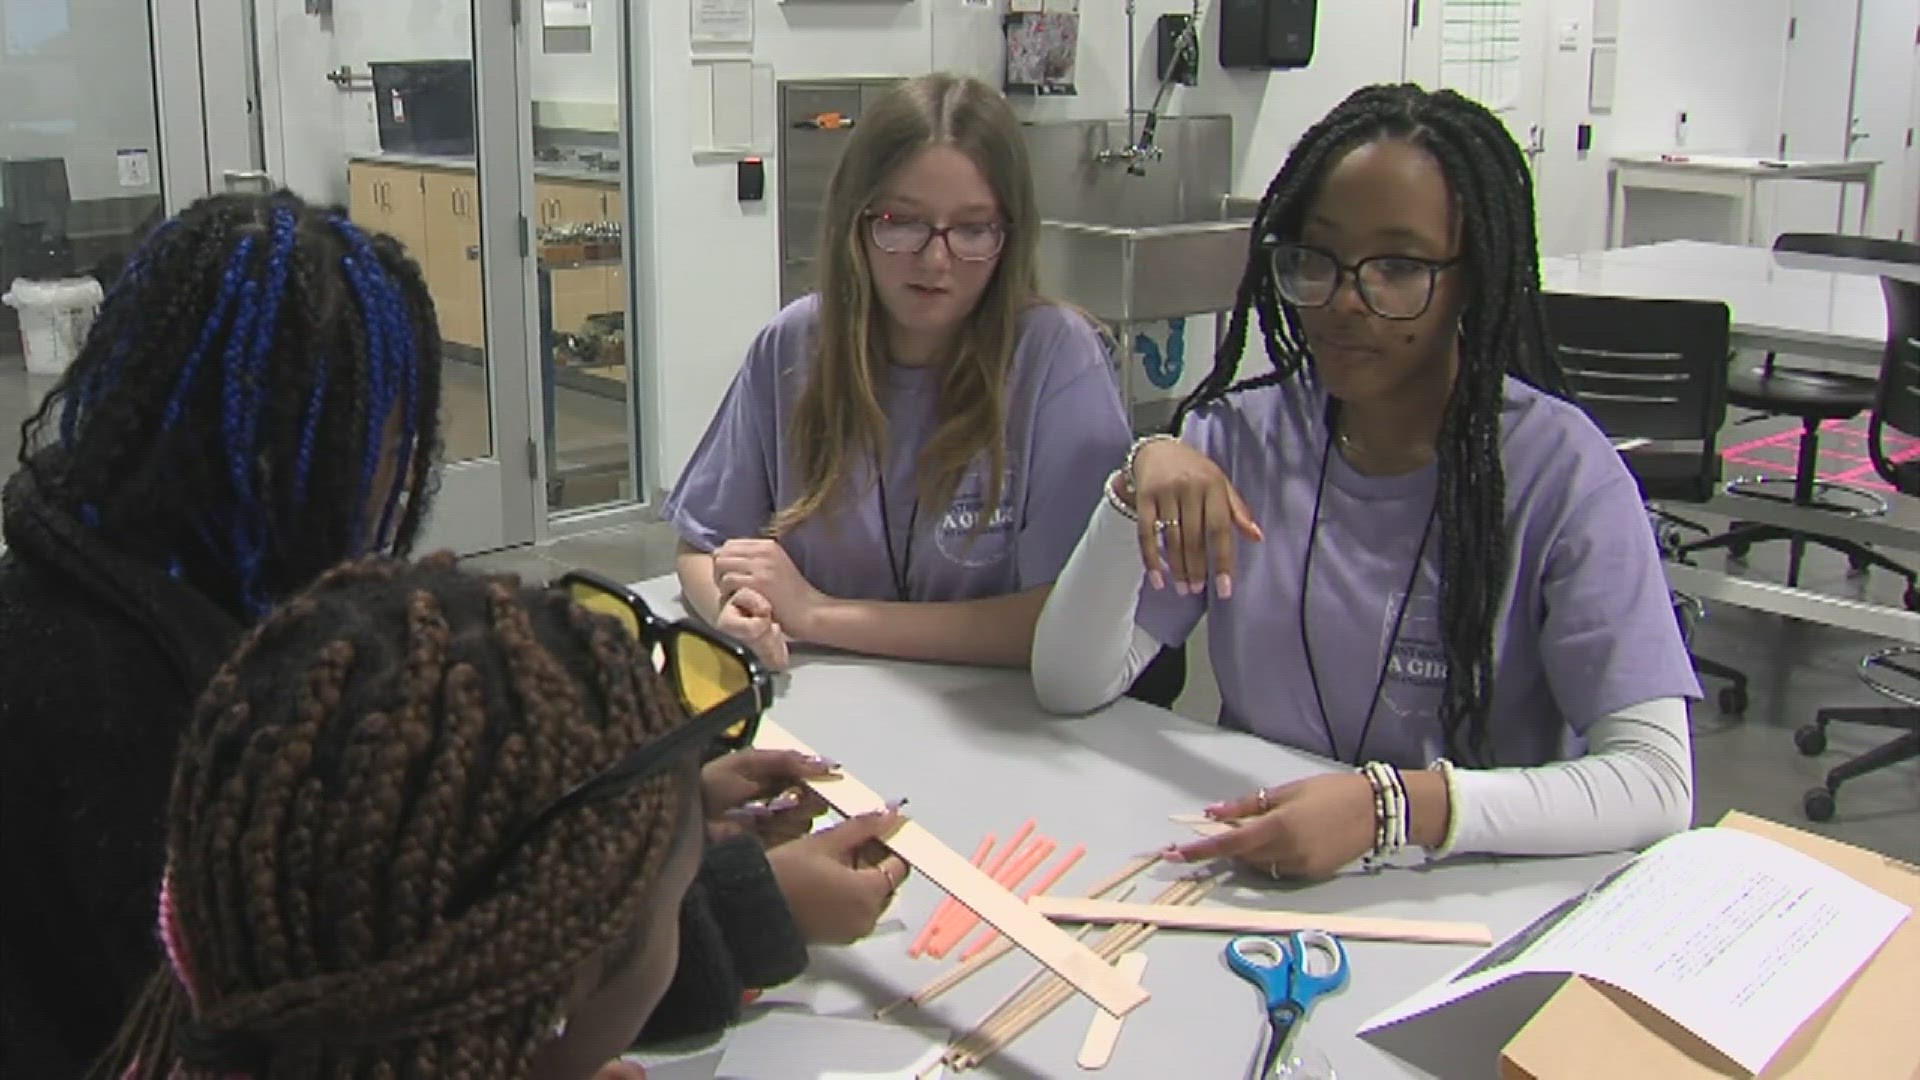 85 girls were invited to ExxonMobil's Introduce A Girl To Engineering Day.